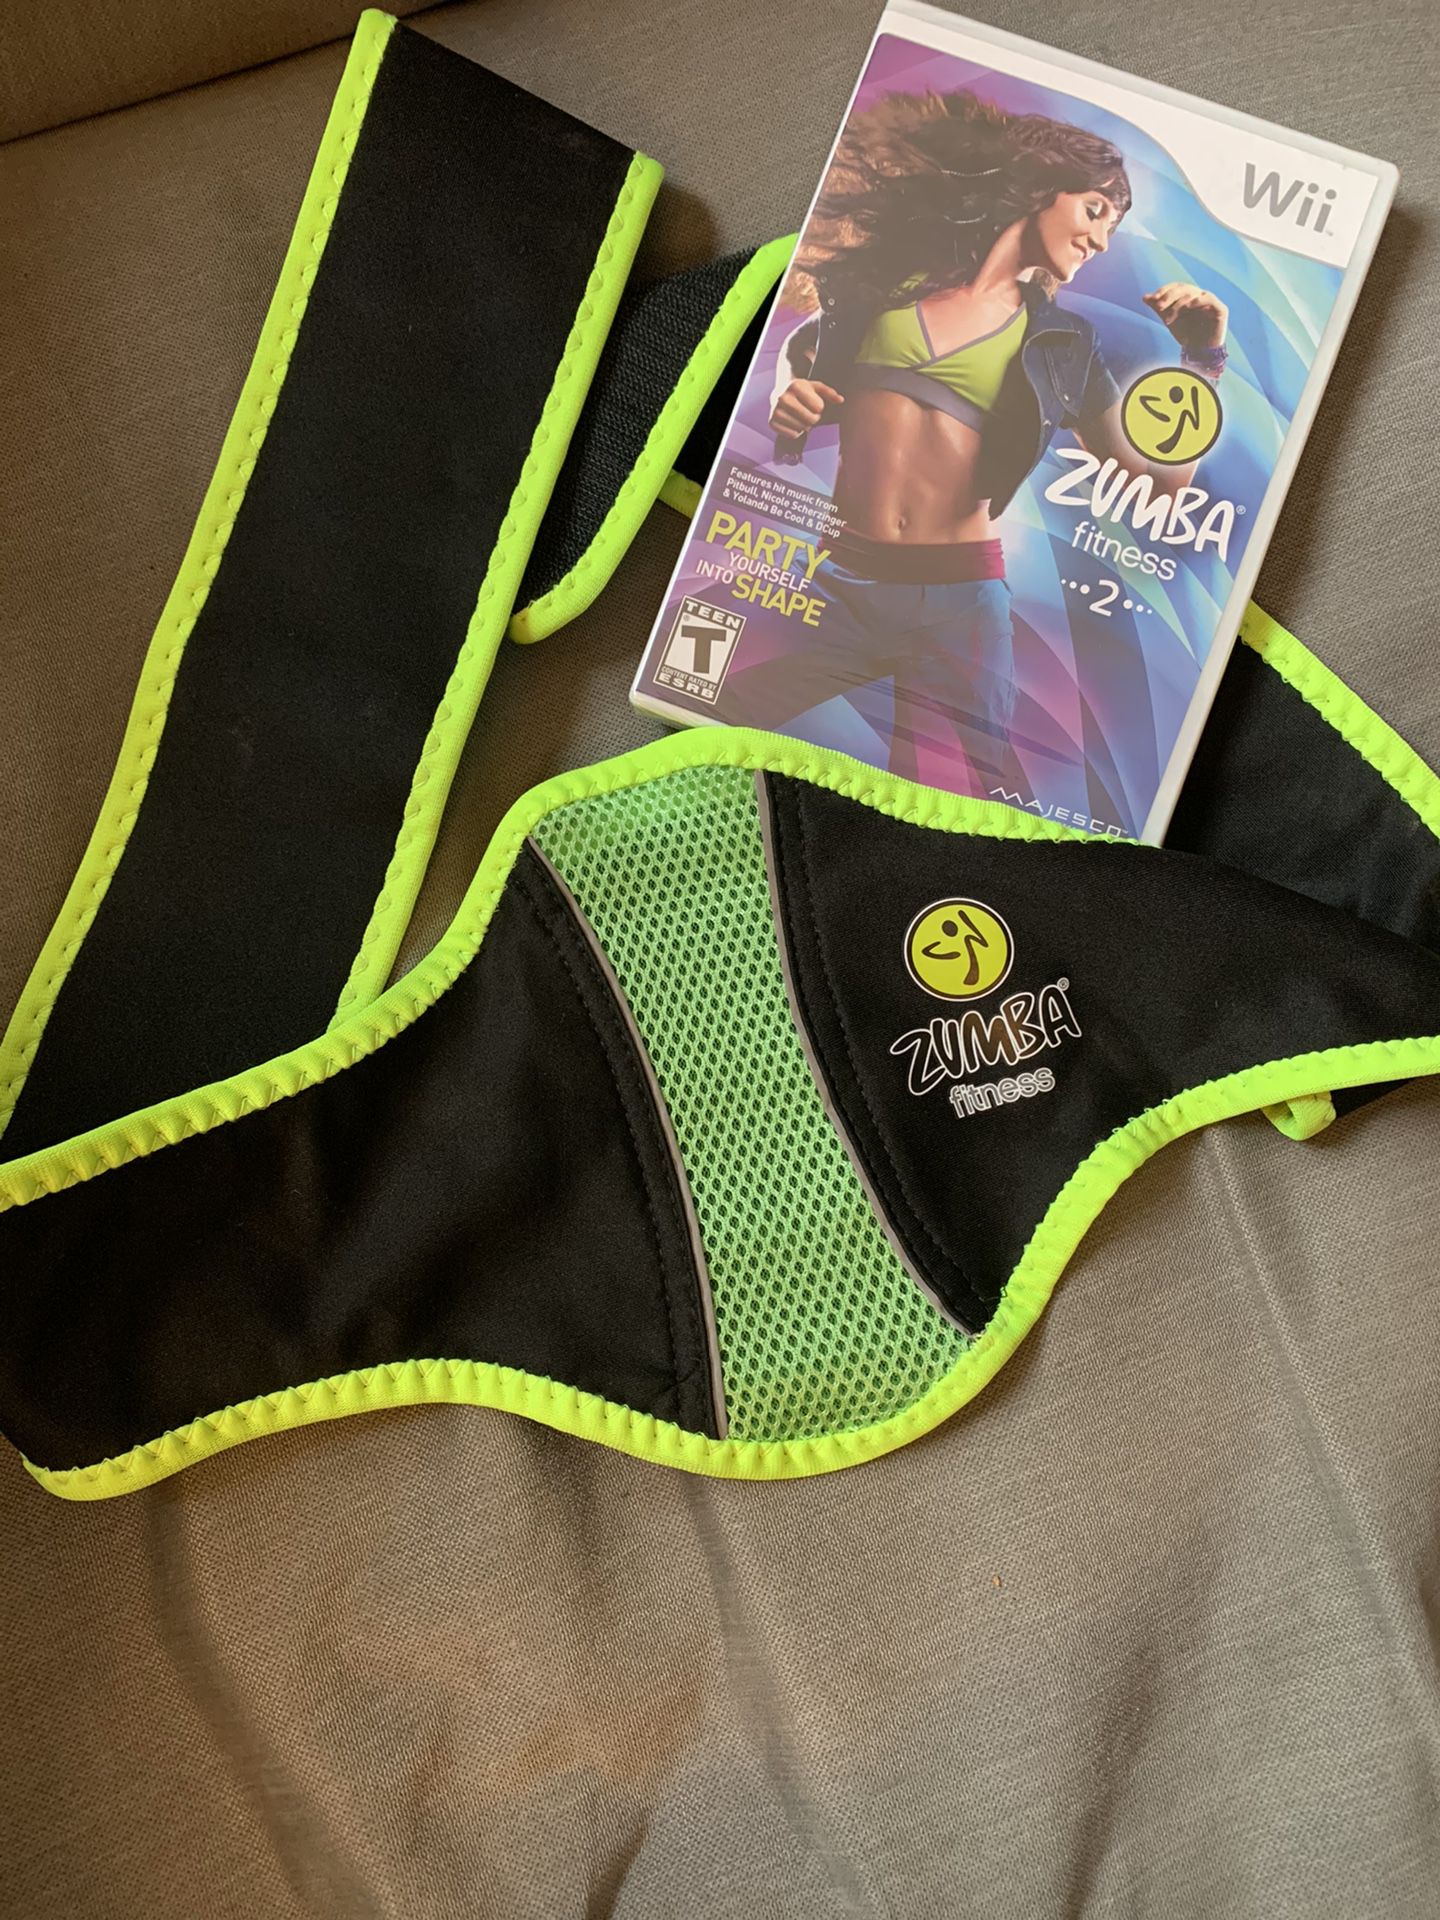 Wii Zumba And Zumba belt for controller